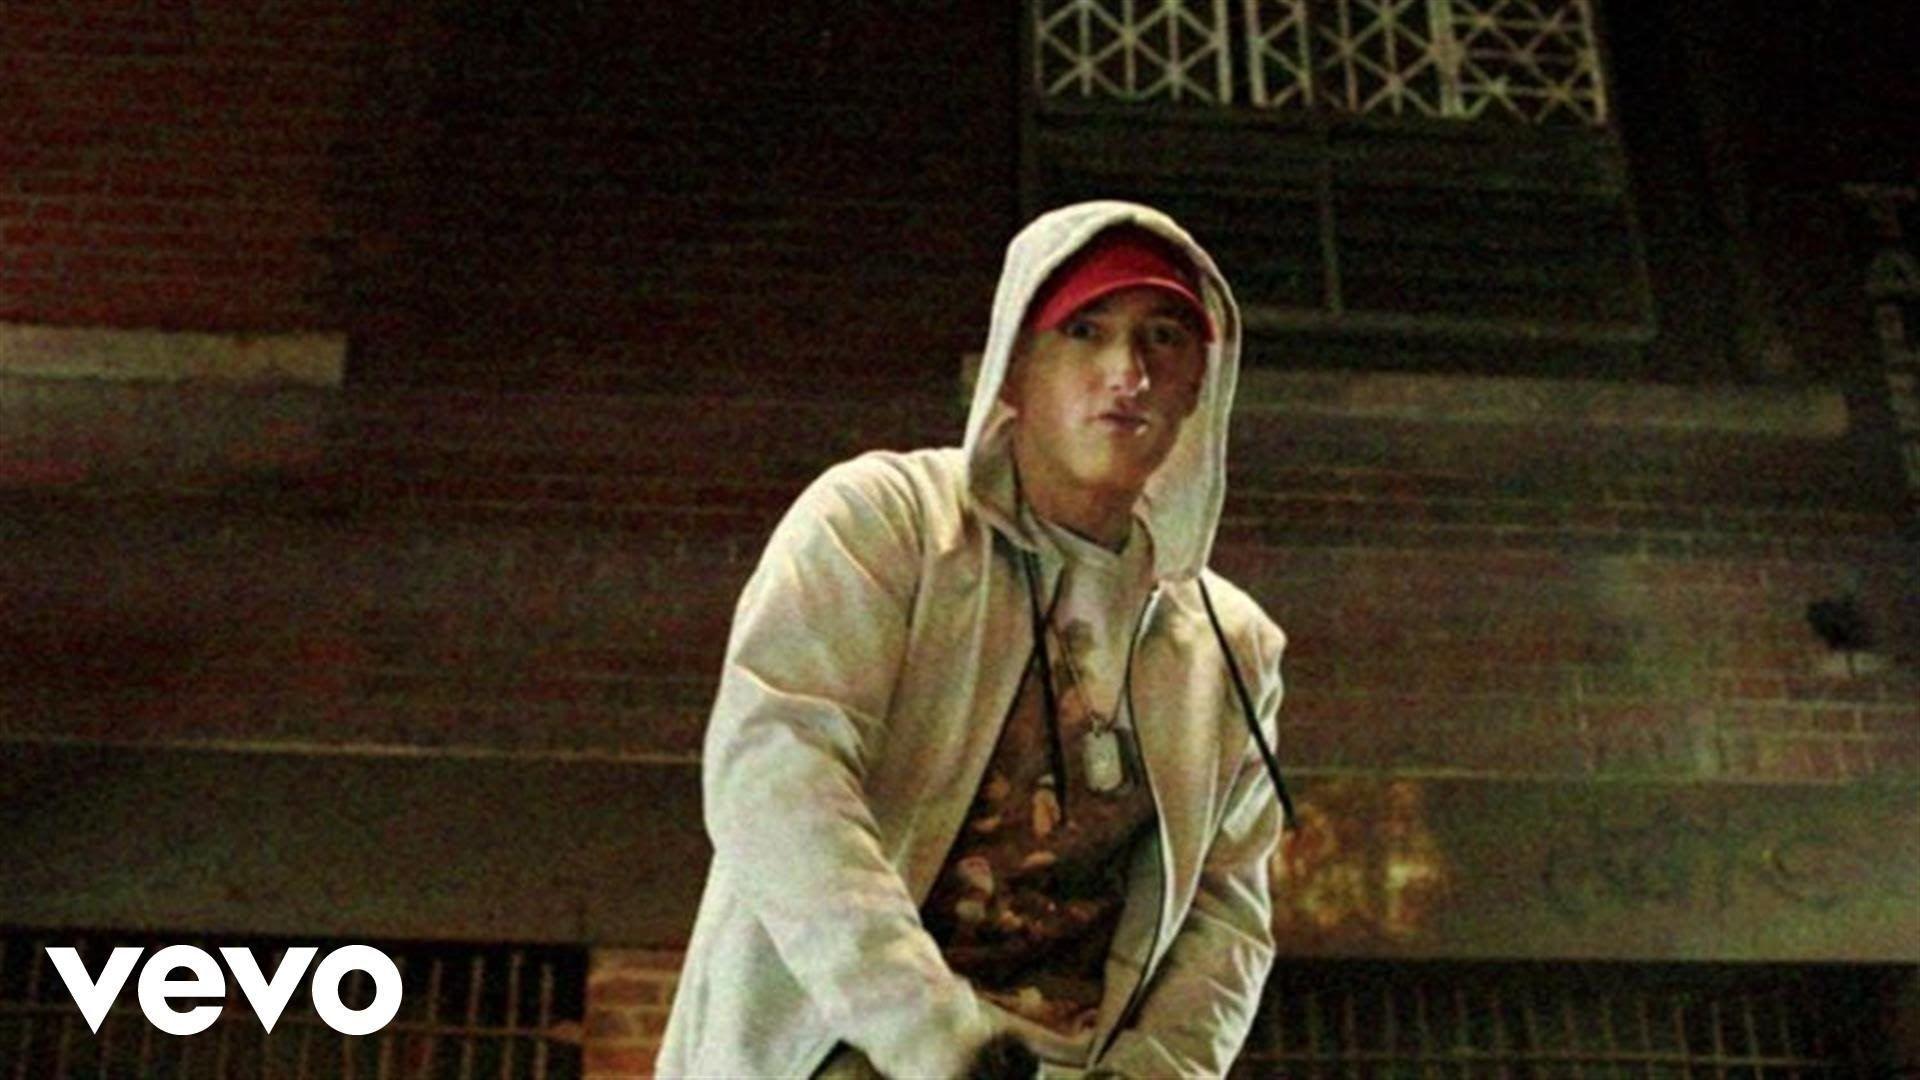 Five things we want to see from Eminem&;s new album. Music